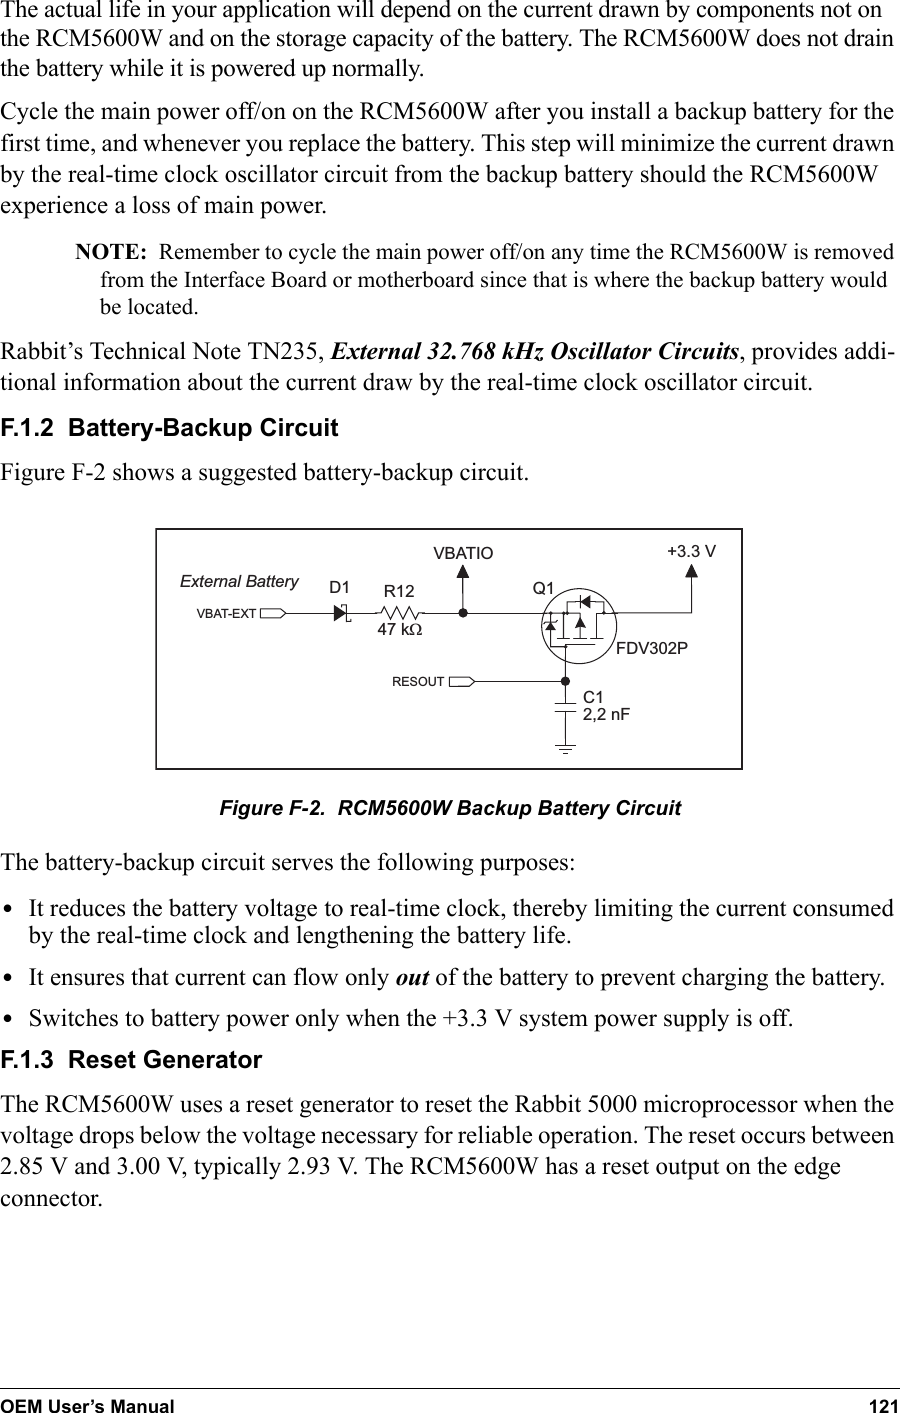 OEM User’s Manual 121The actual life in your application will depend on the current drawn by components not on the RCM5600W and on the storage capacity of the battery. The RCM5600W does not drain the battery while it is powered up normally.Cycle the main power off/on on the RCM5600W after you install a backup battery for the first time, and whenever you replace the battery. This step will minimize the current drawn by the real-time clock oscillator circuit from the backup battery should the RCM5600W experience a loss of main power.NOTE: Remember to cycle the main power off/on any time the RCM5600W is removed from the Interface Board or motherboard since that is where the backup battery would be located.Rabbit’s Technical Note TN235, External 32.768 kHz Oscillator Circuits, provides addi-tional information about the current draw by the real-time clock oscillator circuit.F.1.2  Battery-Backup CircuitFigure F-2 shows a suggested battery-backup circuit.VBATIO47 kWR12VBAT-EXTExternal Battery+3.3 VD1C12,2 nFQ1FDV302PRESOUTFigure F-2.  RCM5600W Backup Battery CircuitThe battery-backup circuit serves the following purposes:•It reduces the battery voltage to real-time clock, thereby limiting the current consumed by the real-time clock and lengthening the battery life.•It ensures that current can flow only out of the battery to prevent charging the battery.•Switches to battery power only when the +3.3 V system power supply is off.F.1.3  Reset GeneratorThe RCM5600W uses a reset generator to reset the Rabbit 5000 microprocessor when the voltage drops below the voltage necessary for reliable operation. The reset occurs between 2.85 V and 3.00 V, typically 2.93 V. The RCM5600W has a reset output on the edge connector.